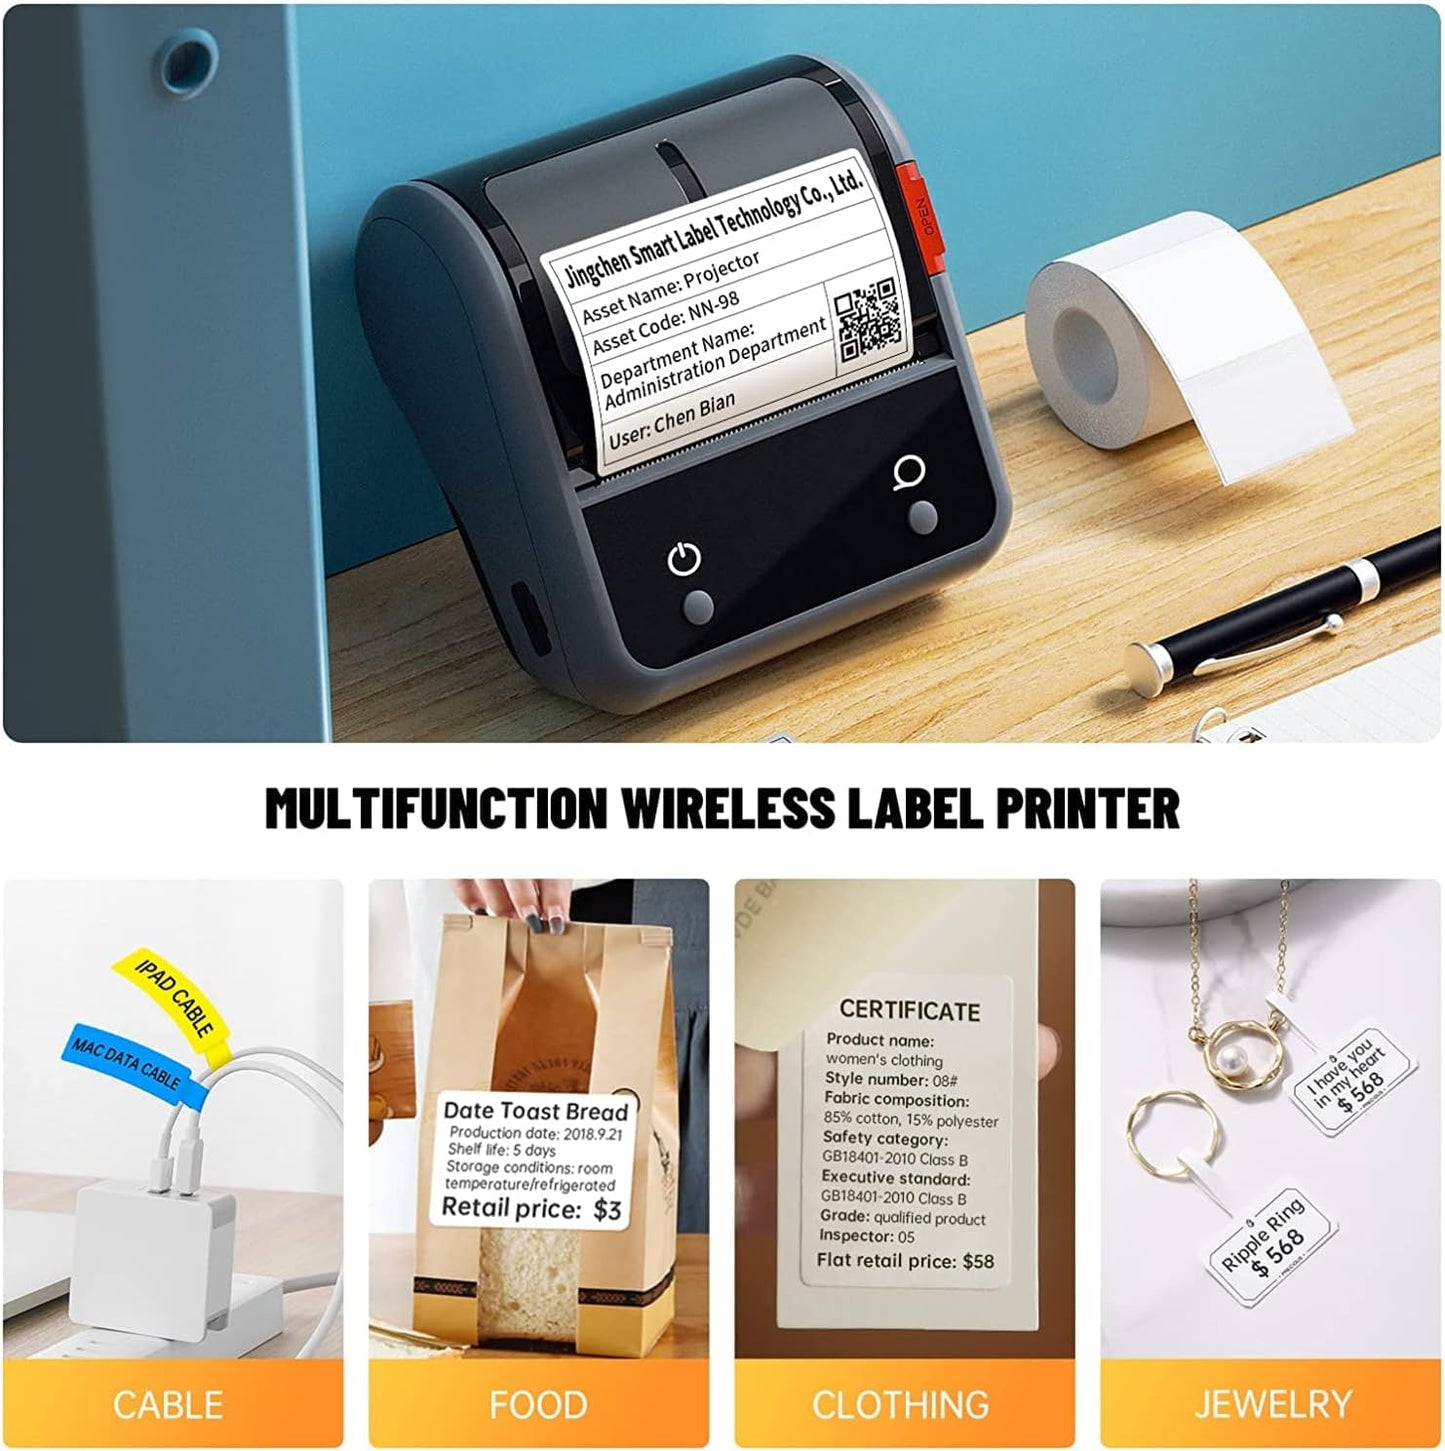 NIIMBOT - B3S - PORTABLE THERMAL LABEL BLUETOOTH PRINTER INCLUDING FREE LABEL (70*40MM - WHITE)